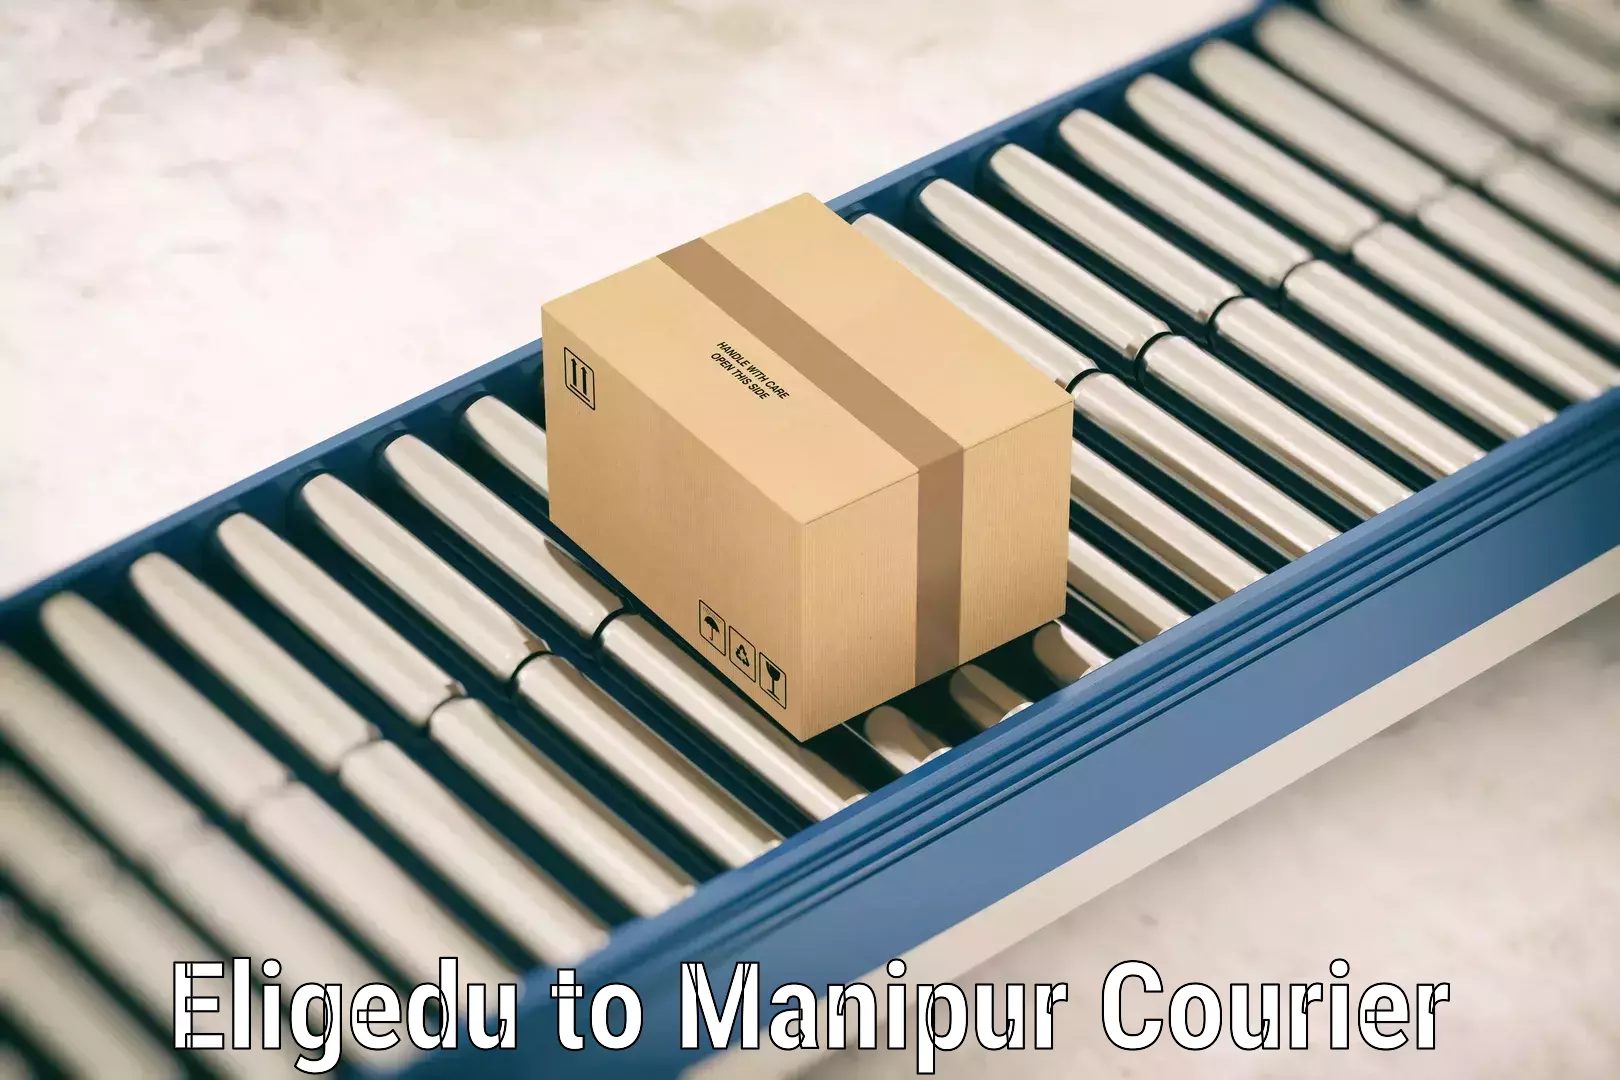 Luggage storage and delivery Eligedu to Manipur